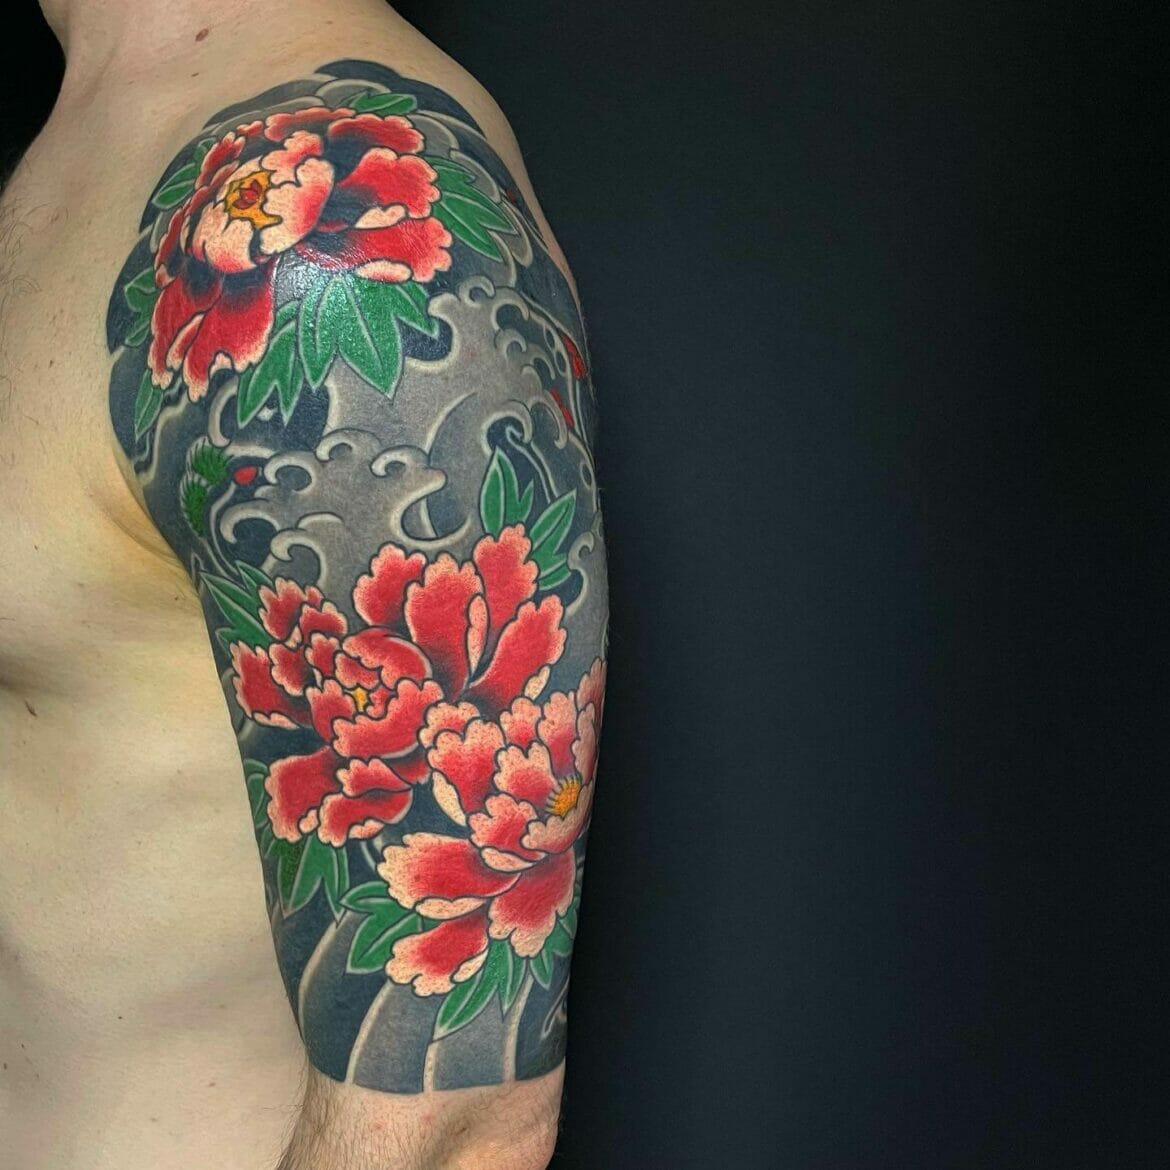 101 Best Japanese Full Sleeve Tattoo Ideas That Will Blow Your Mind!